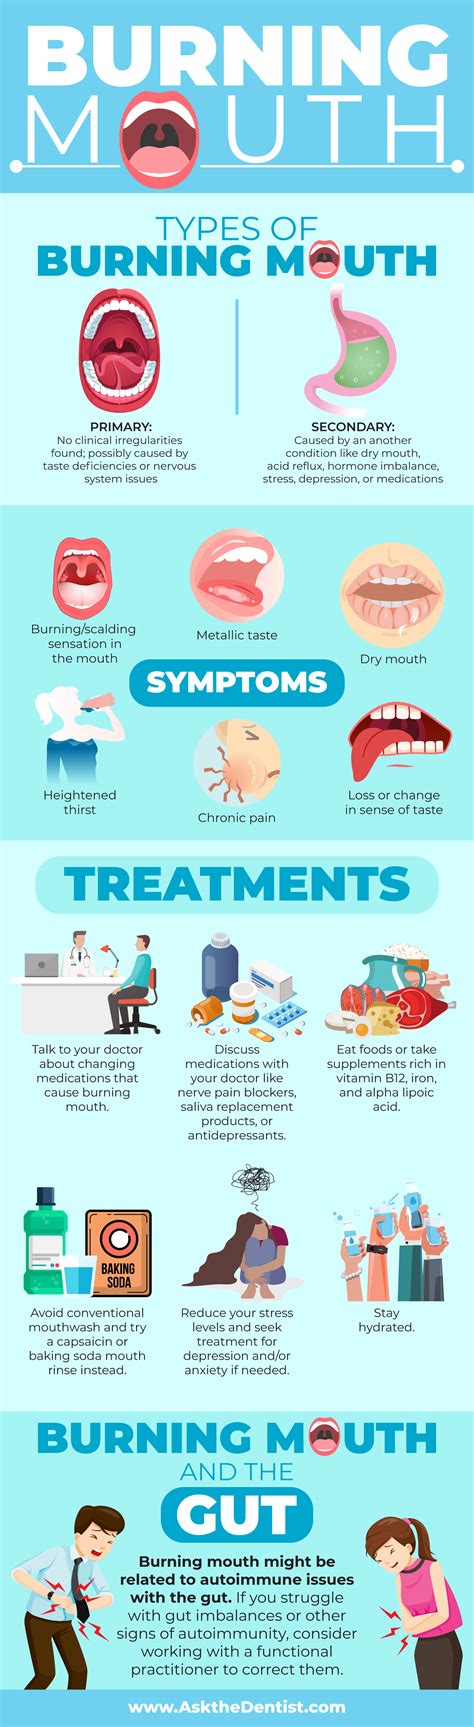 Risk Factors Prevention And Treatment Of Burning Mouth Syndrome